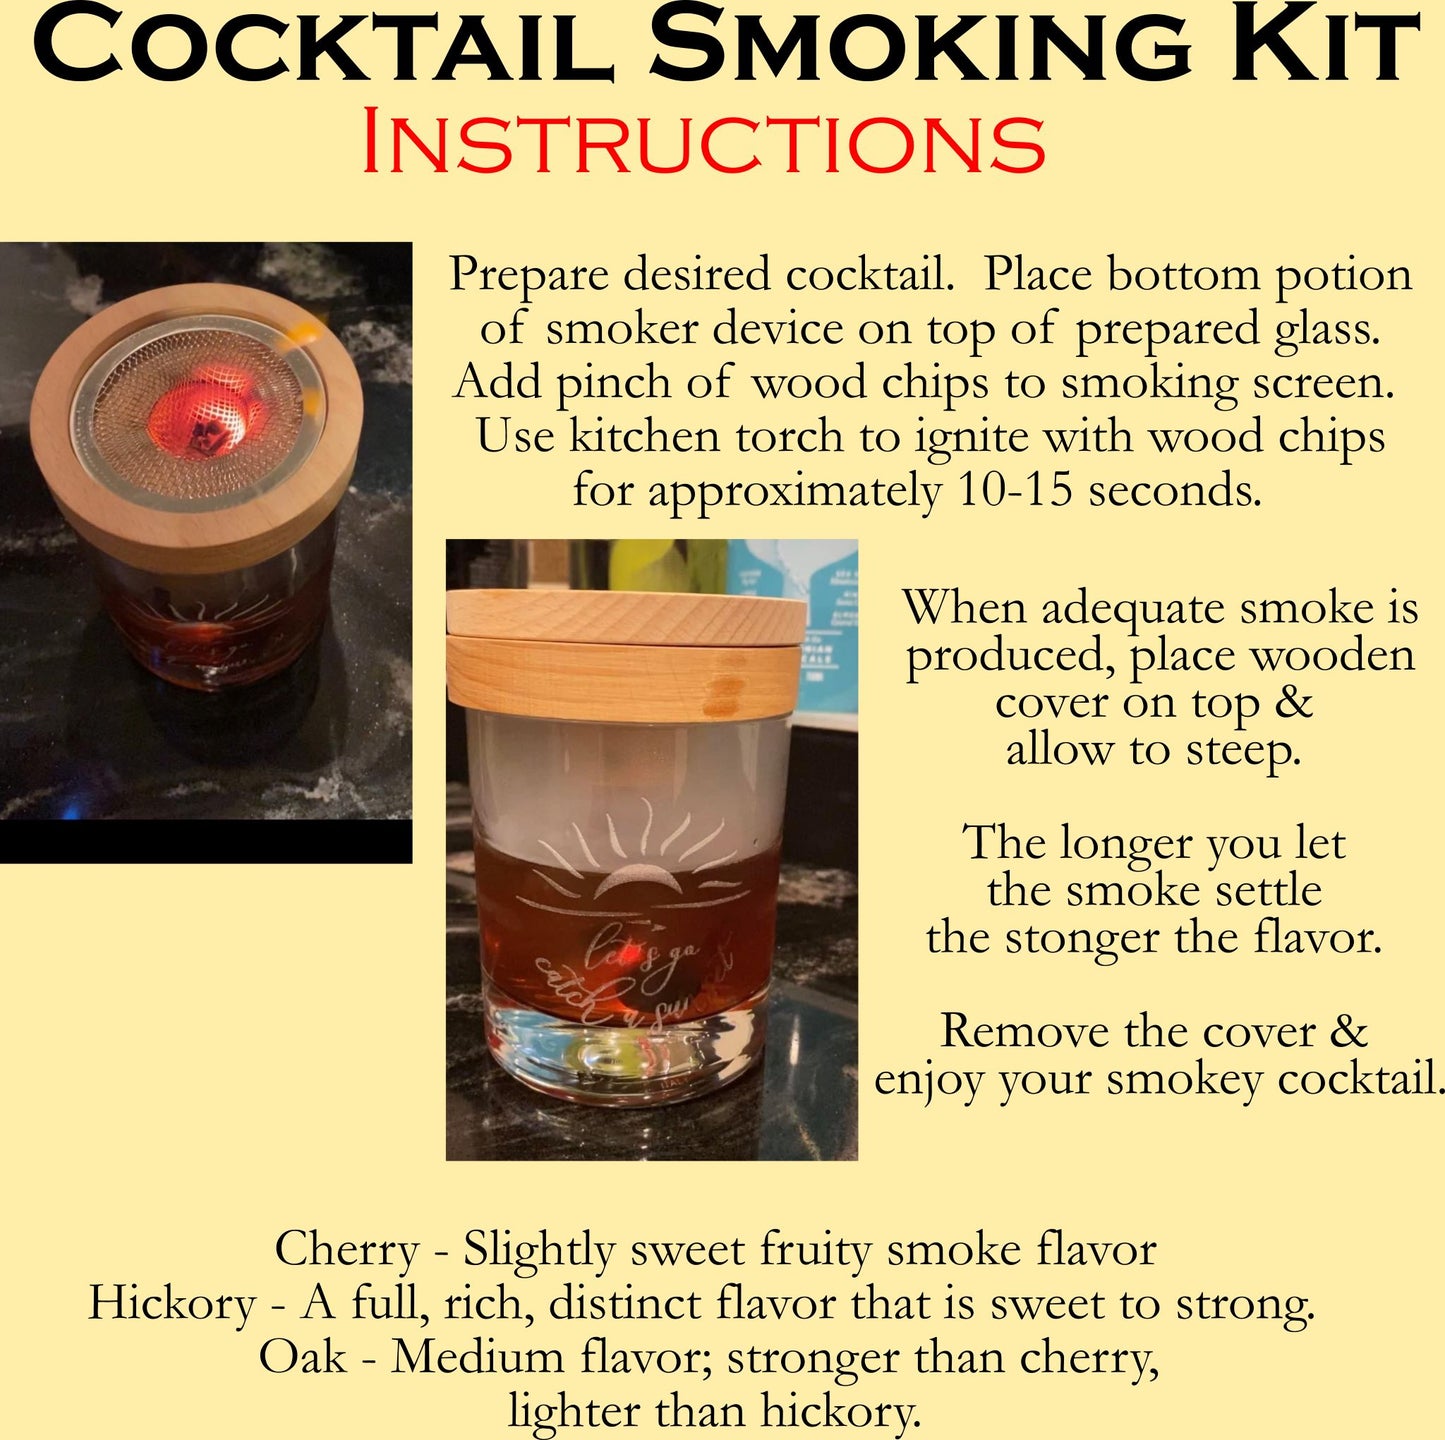 Smoking Kit for Whiskey, Bourbon, Ice Cream or Cheese - 4 Variations of Wood Chips